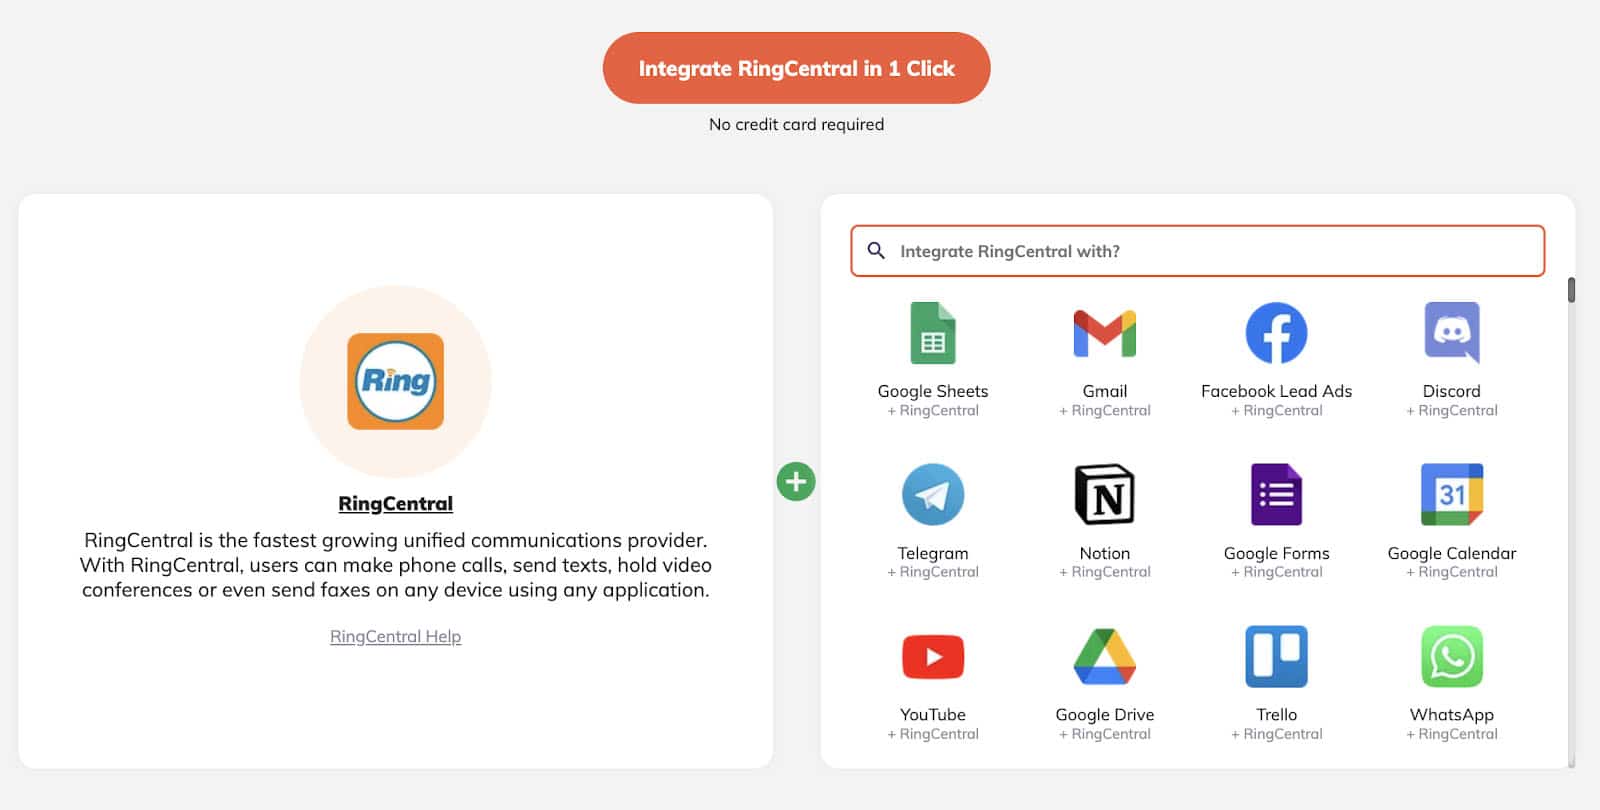 A webpage on Integrately showing a button that says "Integrate RingCentral in 1 click," and two boxes under the button: RingCentral's logo and app description on the left box and logos of different software solutions on the right.